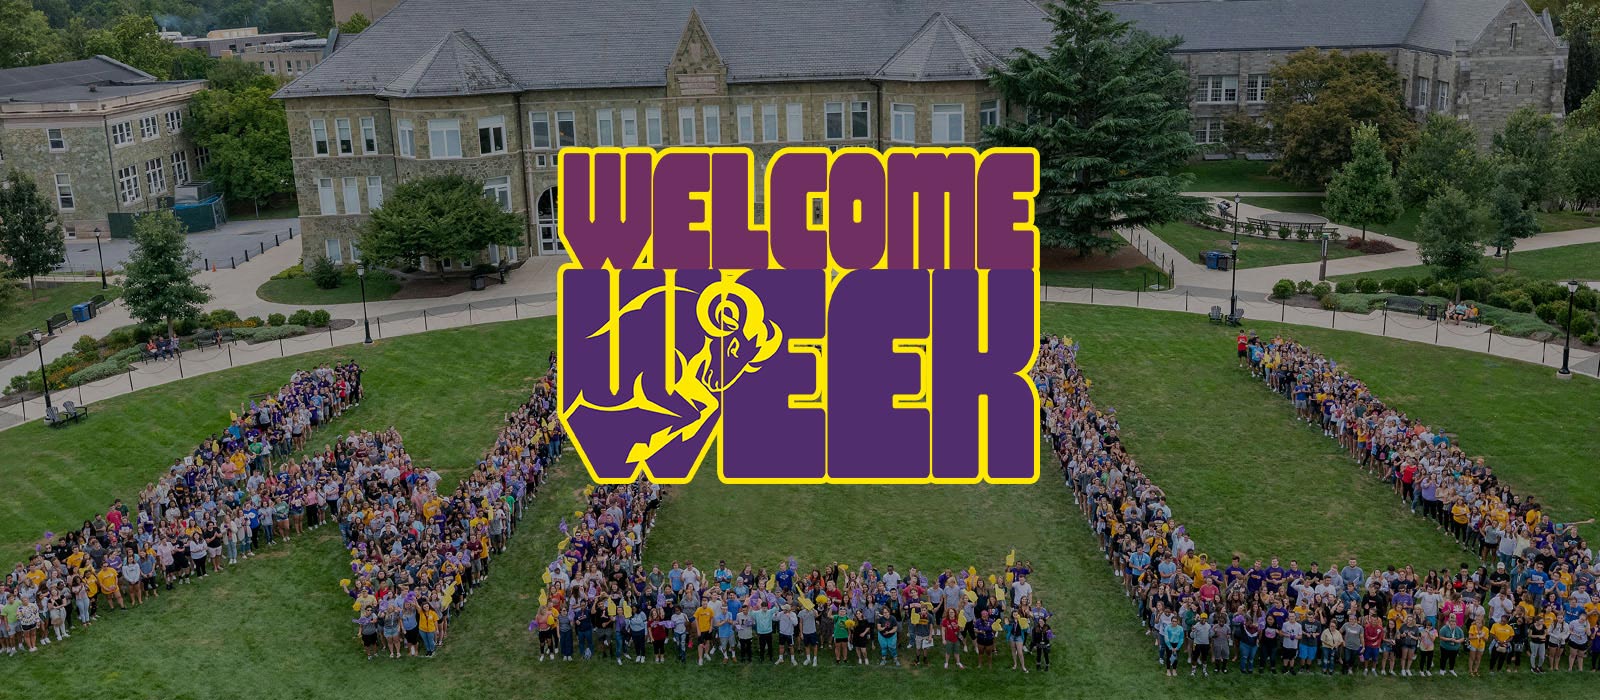 Overhead view, students arranged showing WCU. Text on top of image that says Welcome Week